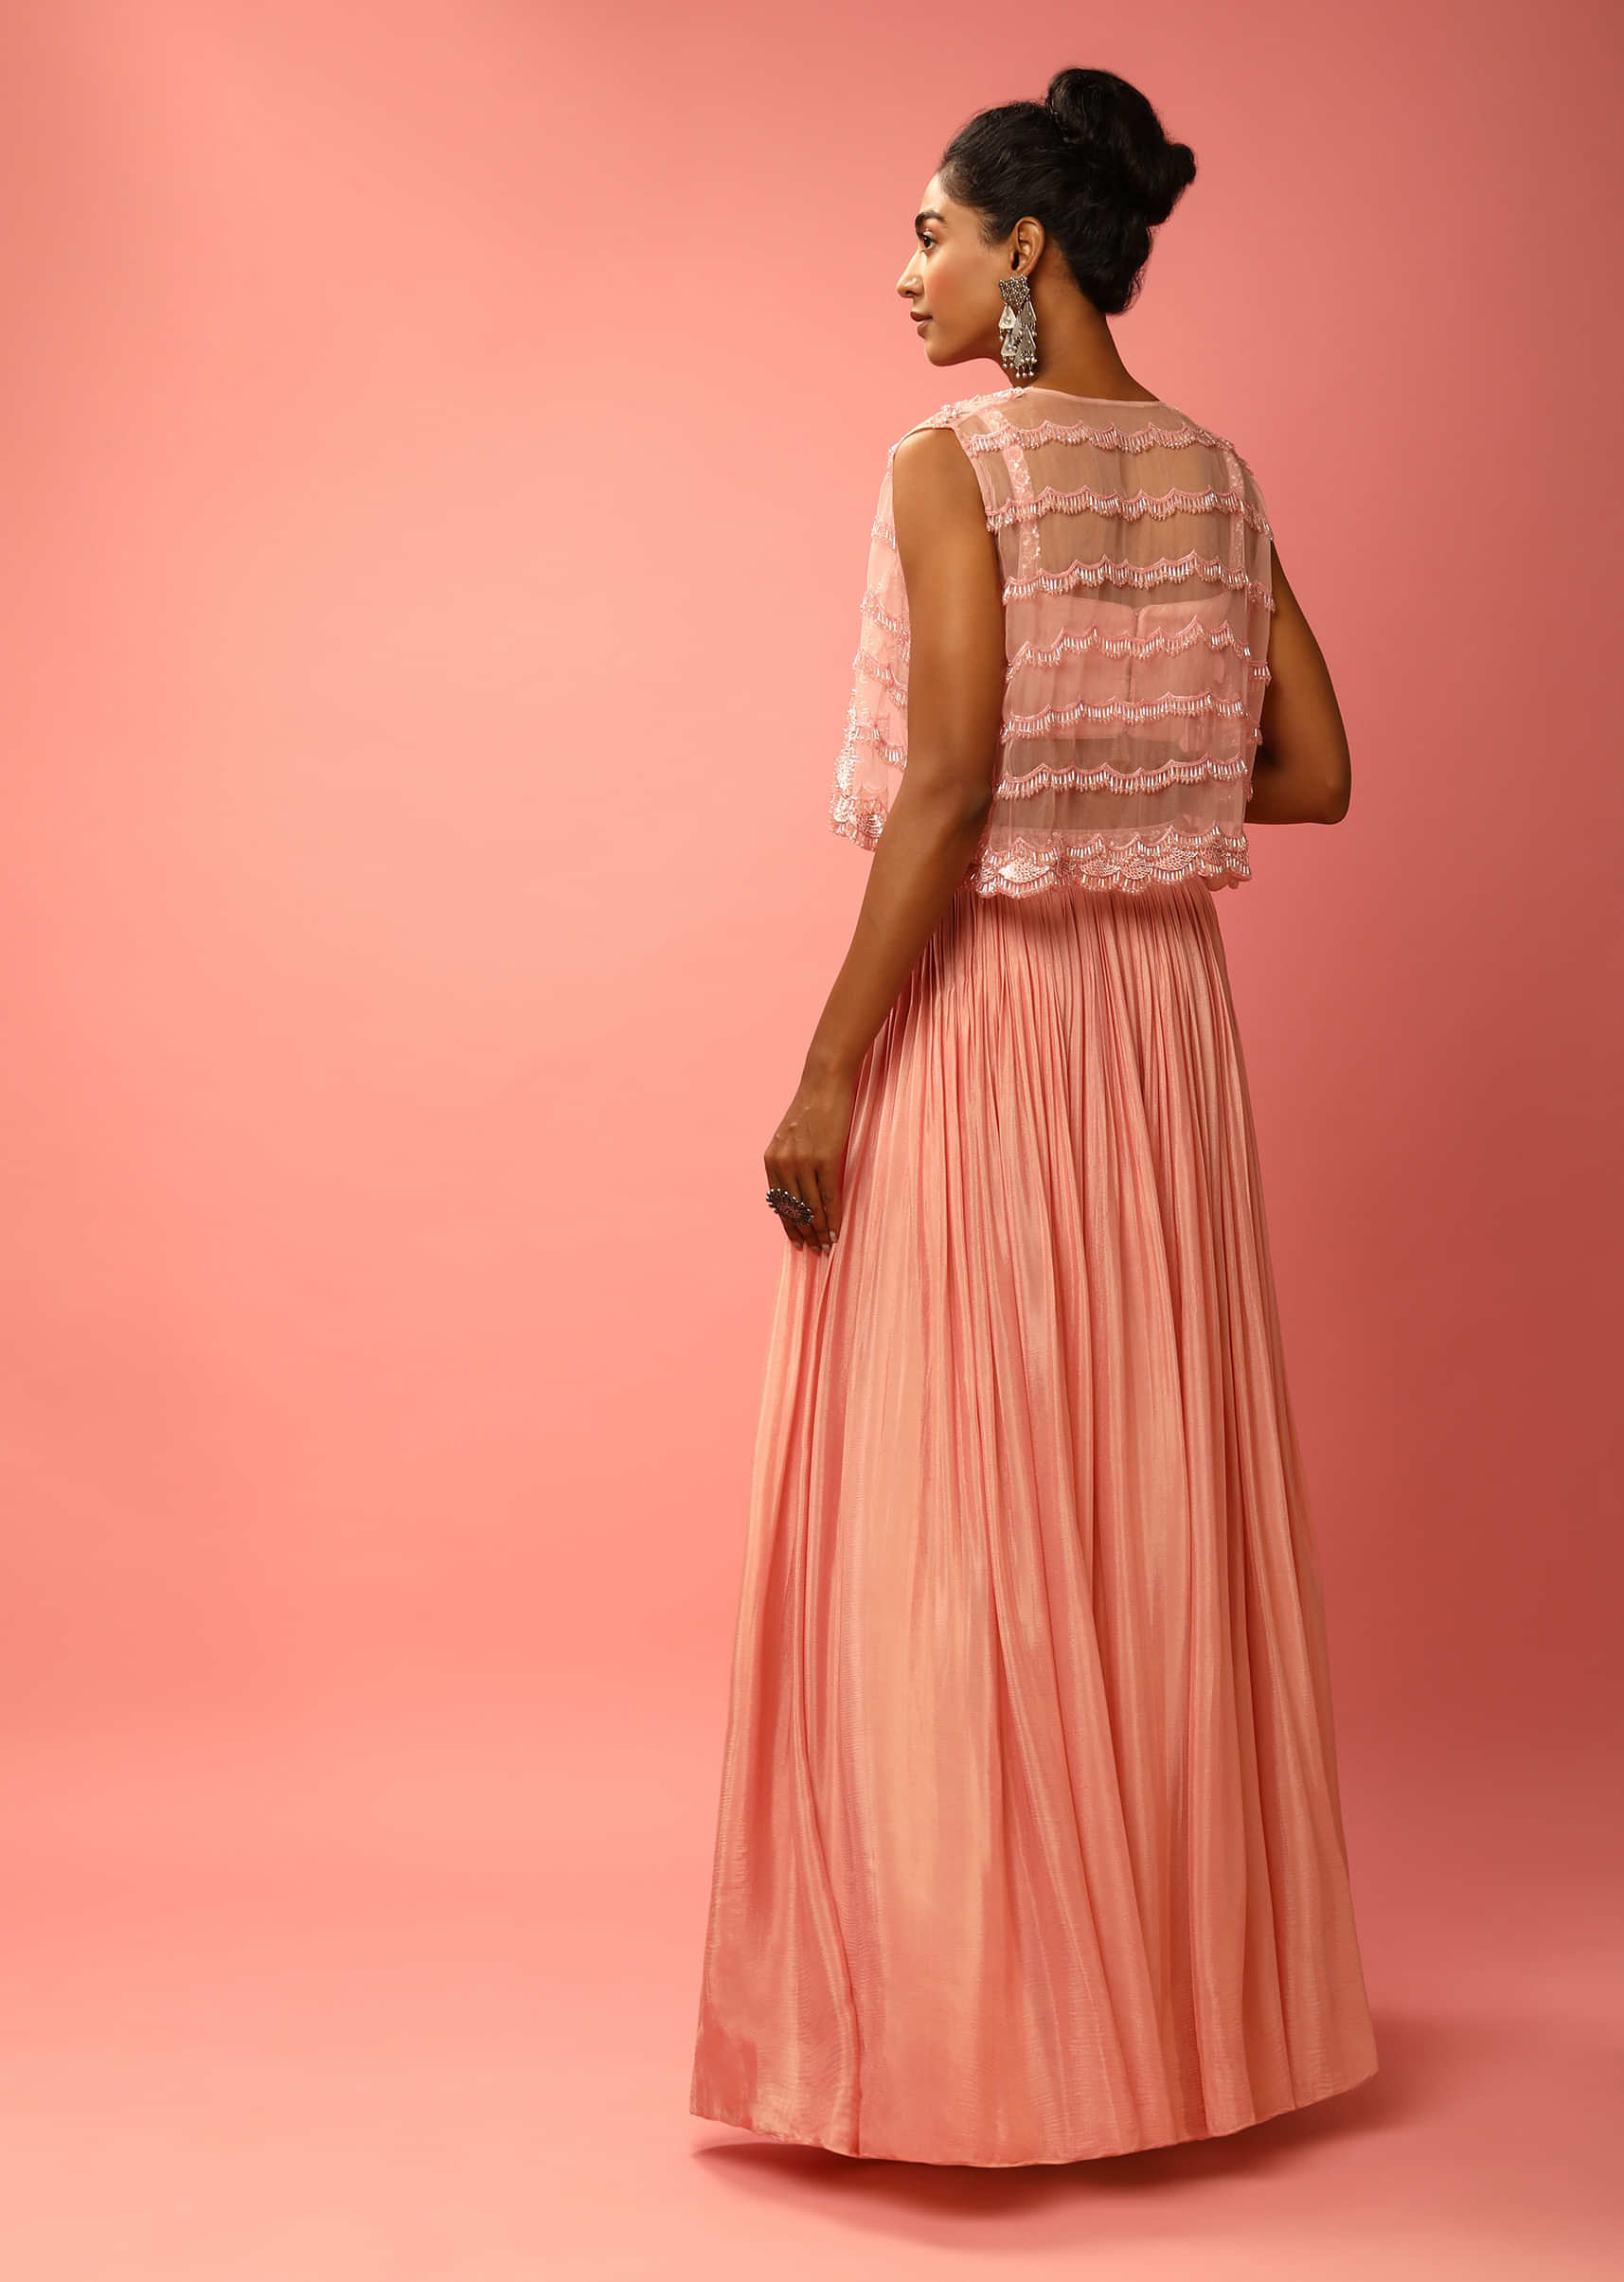 Salmon Pink Skirt And Crop Top With Sequins Embroidery And Tassel Jacket Online - Kalki Fashion